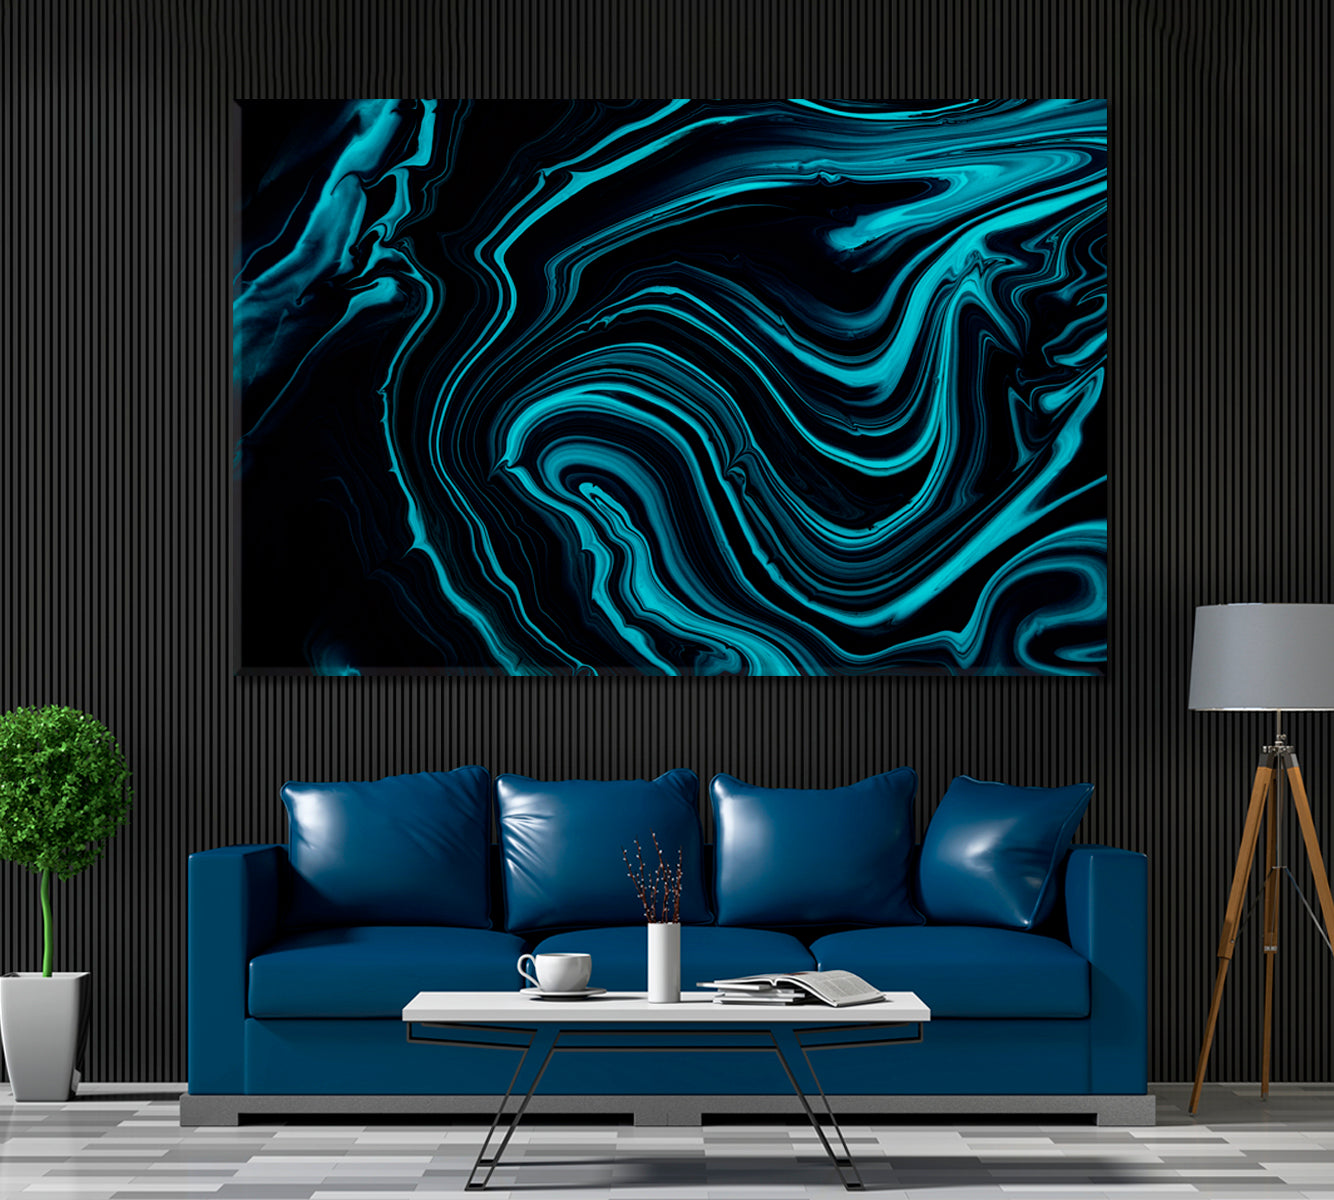 Abstract Liquid Swirl Pattern Canvas Print ArtLexy 1 Panel 24"x16" inches 